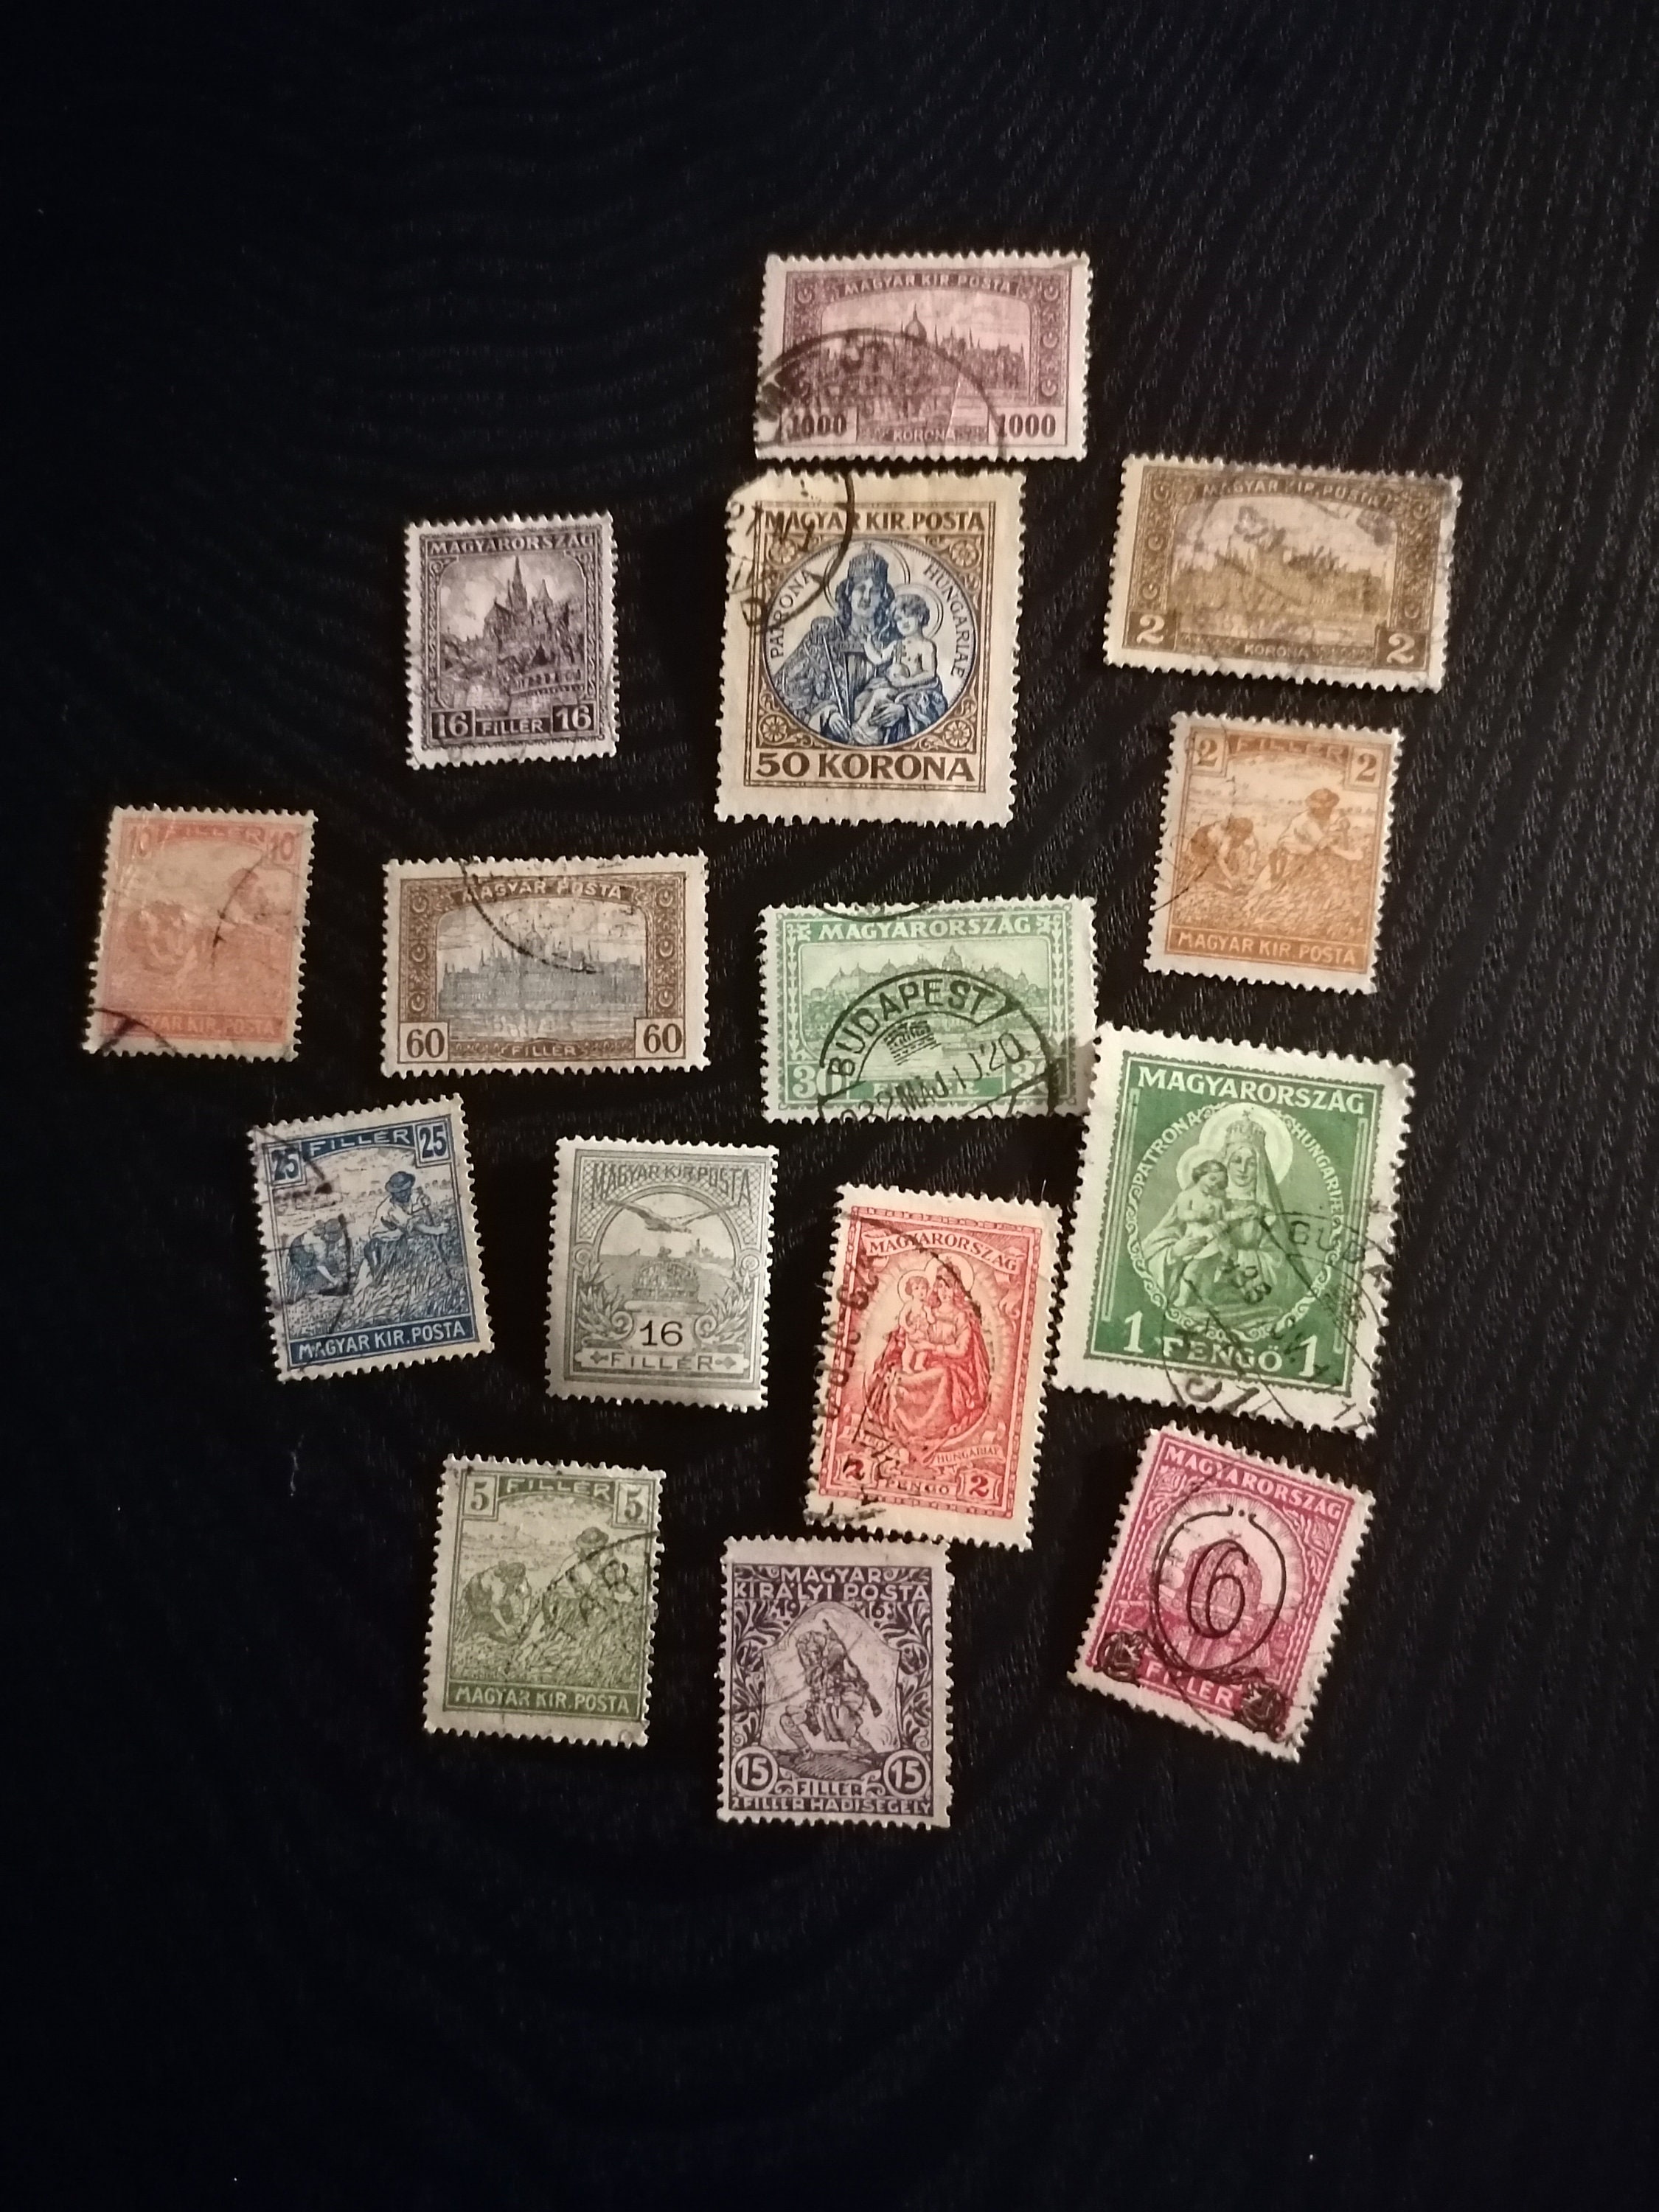 50 Old Postage Stamps. Late 19th Century Early 20th Century